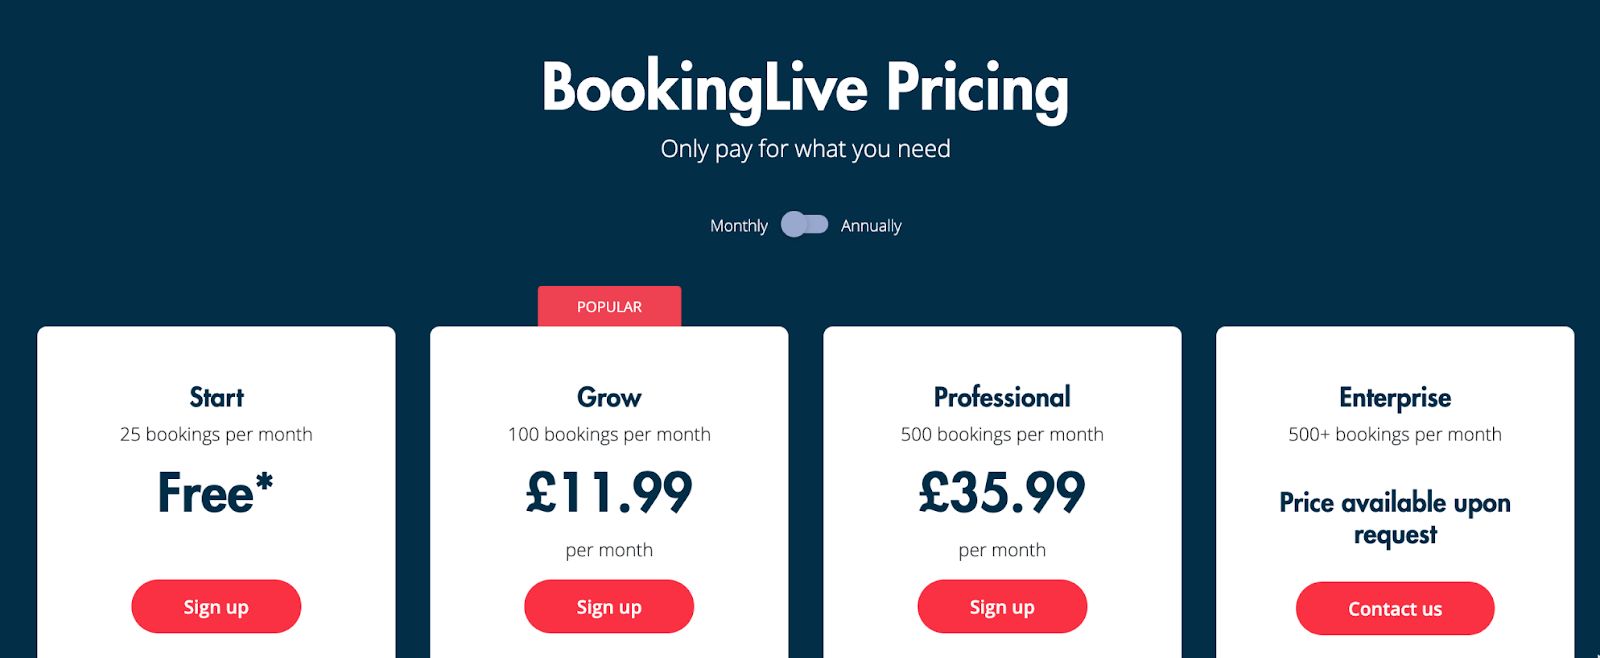 Bookinglive pricing